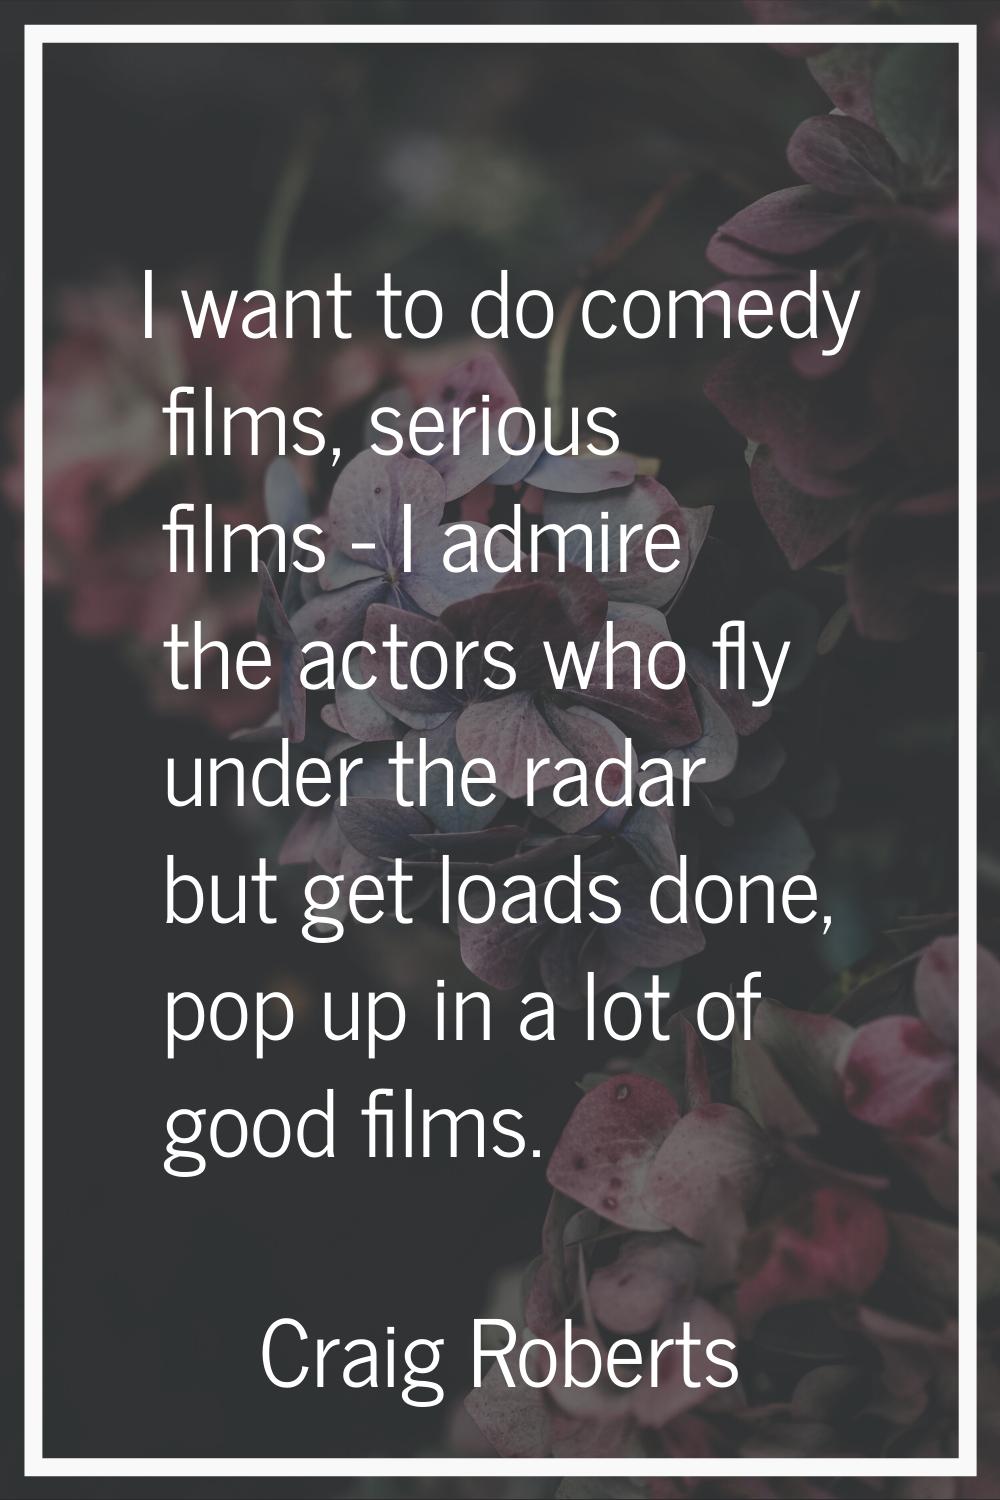 I want to do comedy films, serious films - I admire the actors who fly under the radar but get load